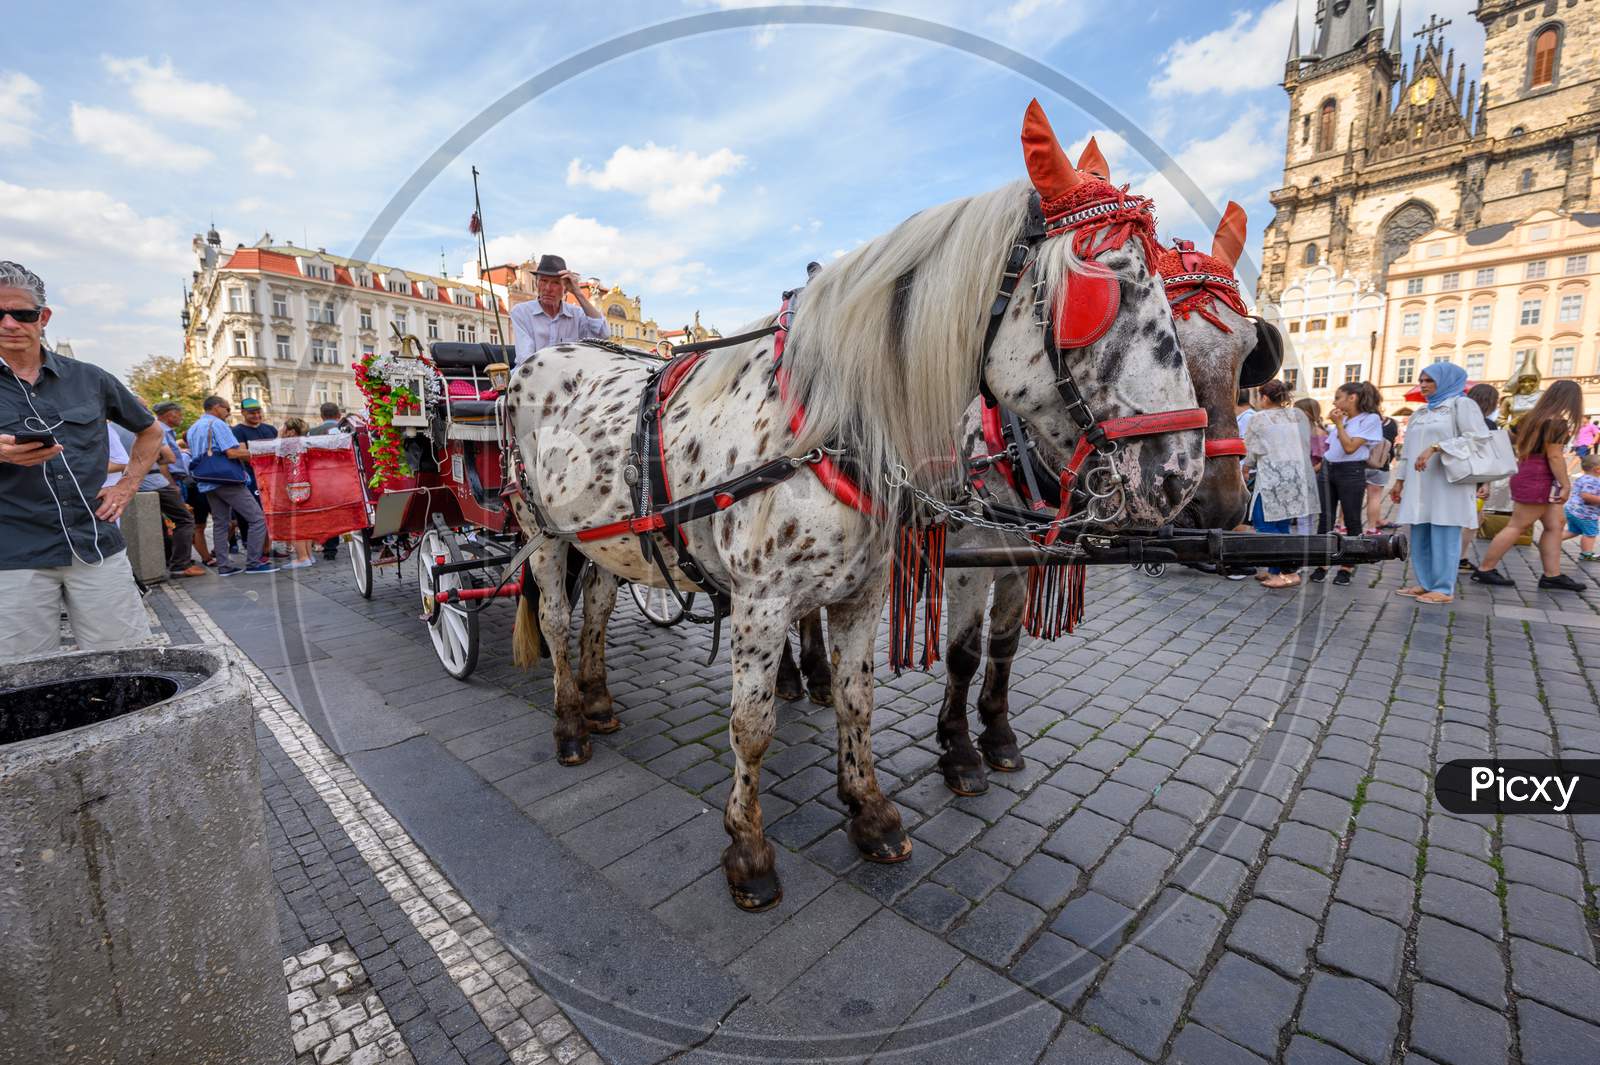 Horse Drawn Carriage And Horses Waiting For Customers In Prague Old Town Square